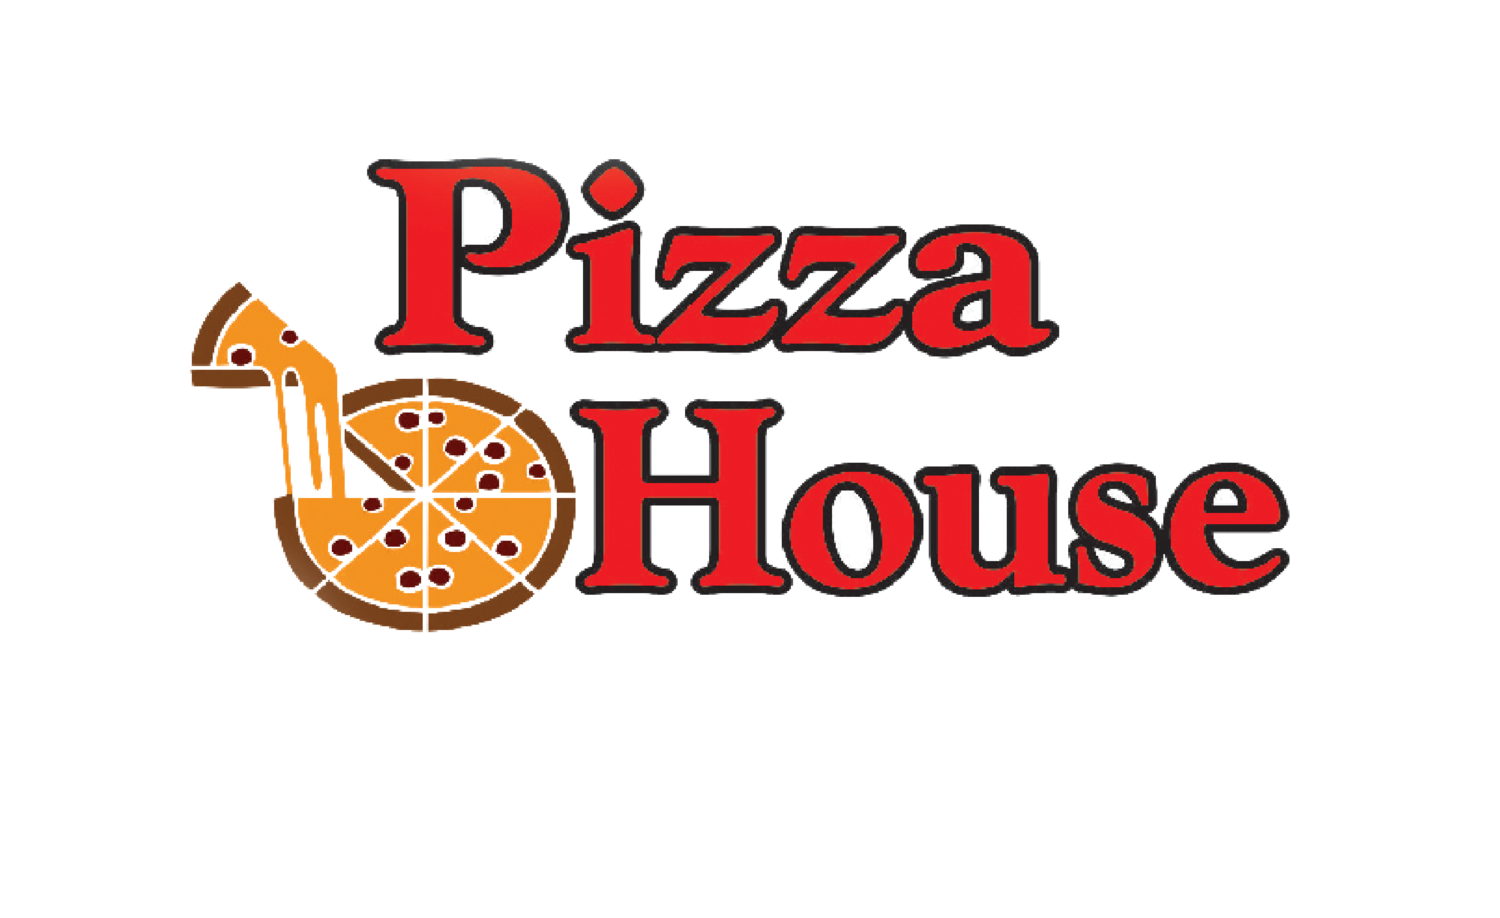 New London Pizza House